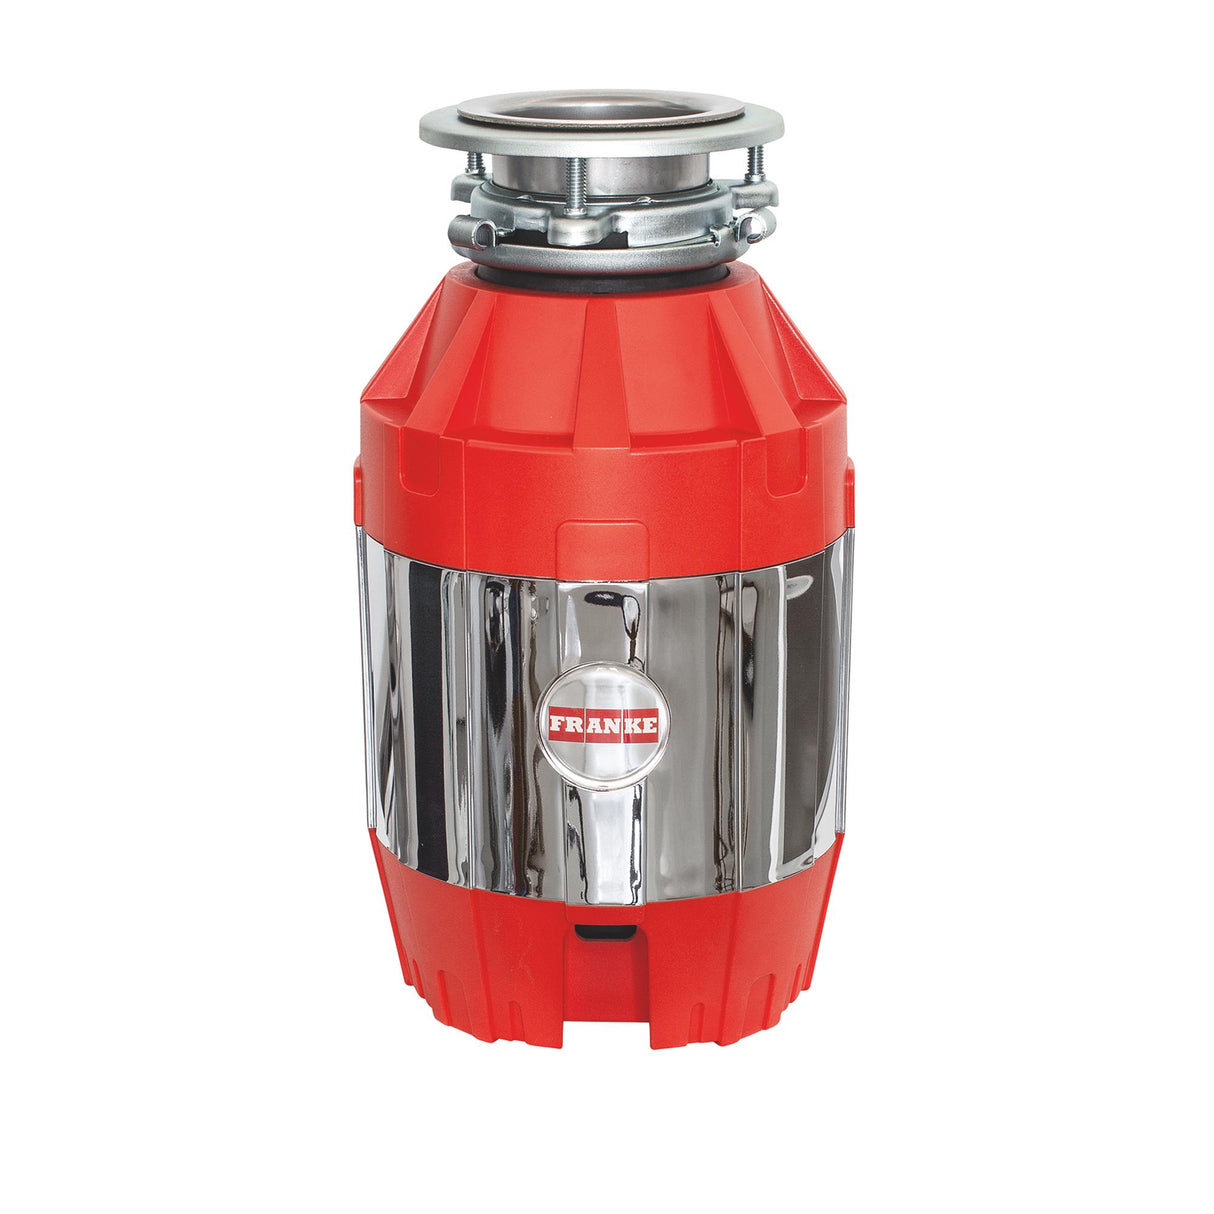 FRANKE FWDJ75 3/4 Horse Power Continuous Feed Waste Disposer Torque Master 2700 RPM Jam-Resistant DC Motor with Silverguard in Red/Chrome